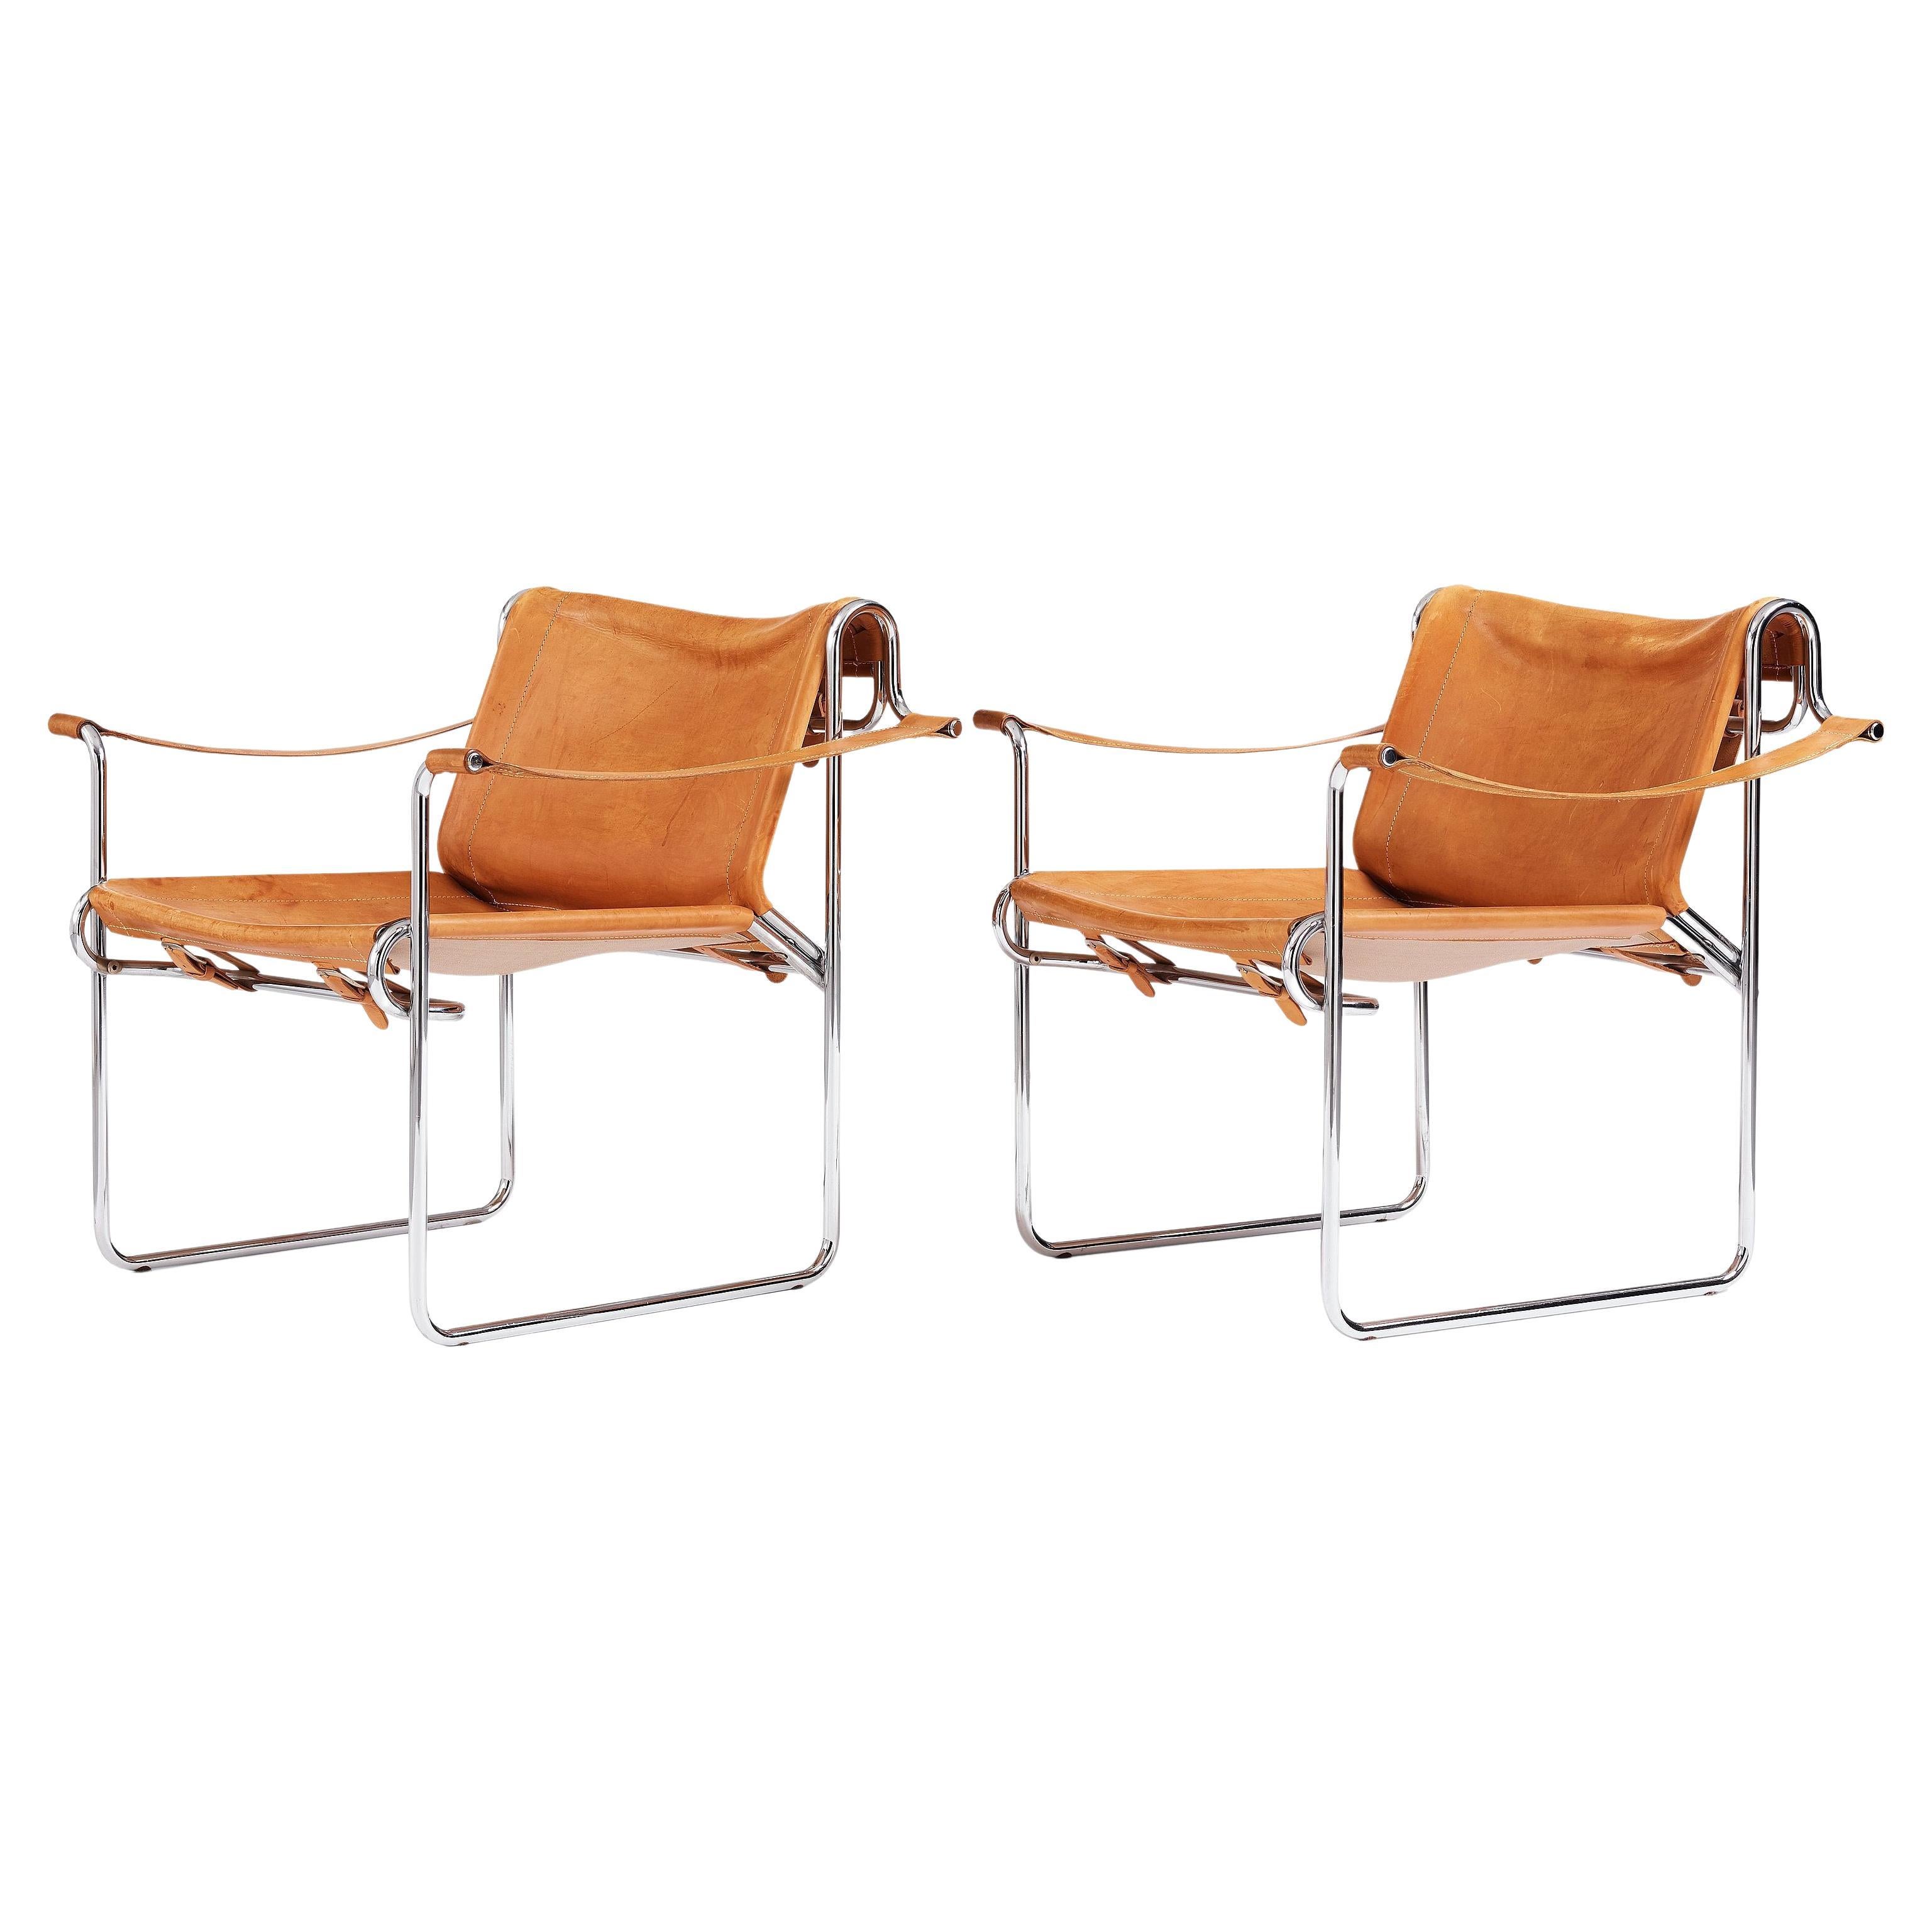 Post War Flamingo Pair of Chairs by Pethrus Lindlöf, Sweden, 1970s